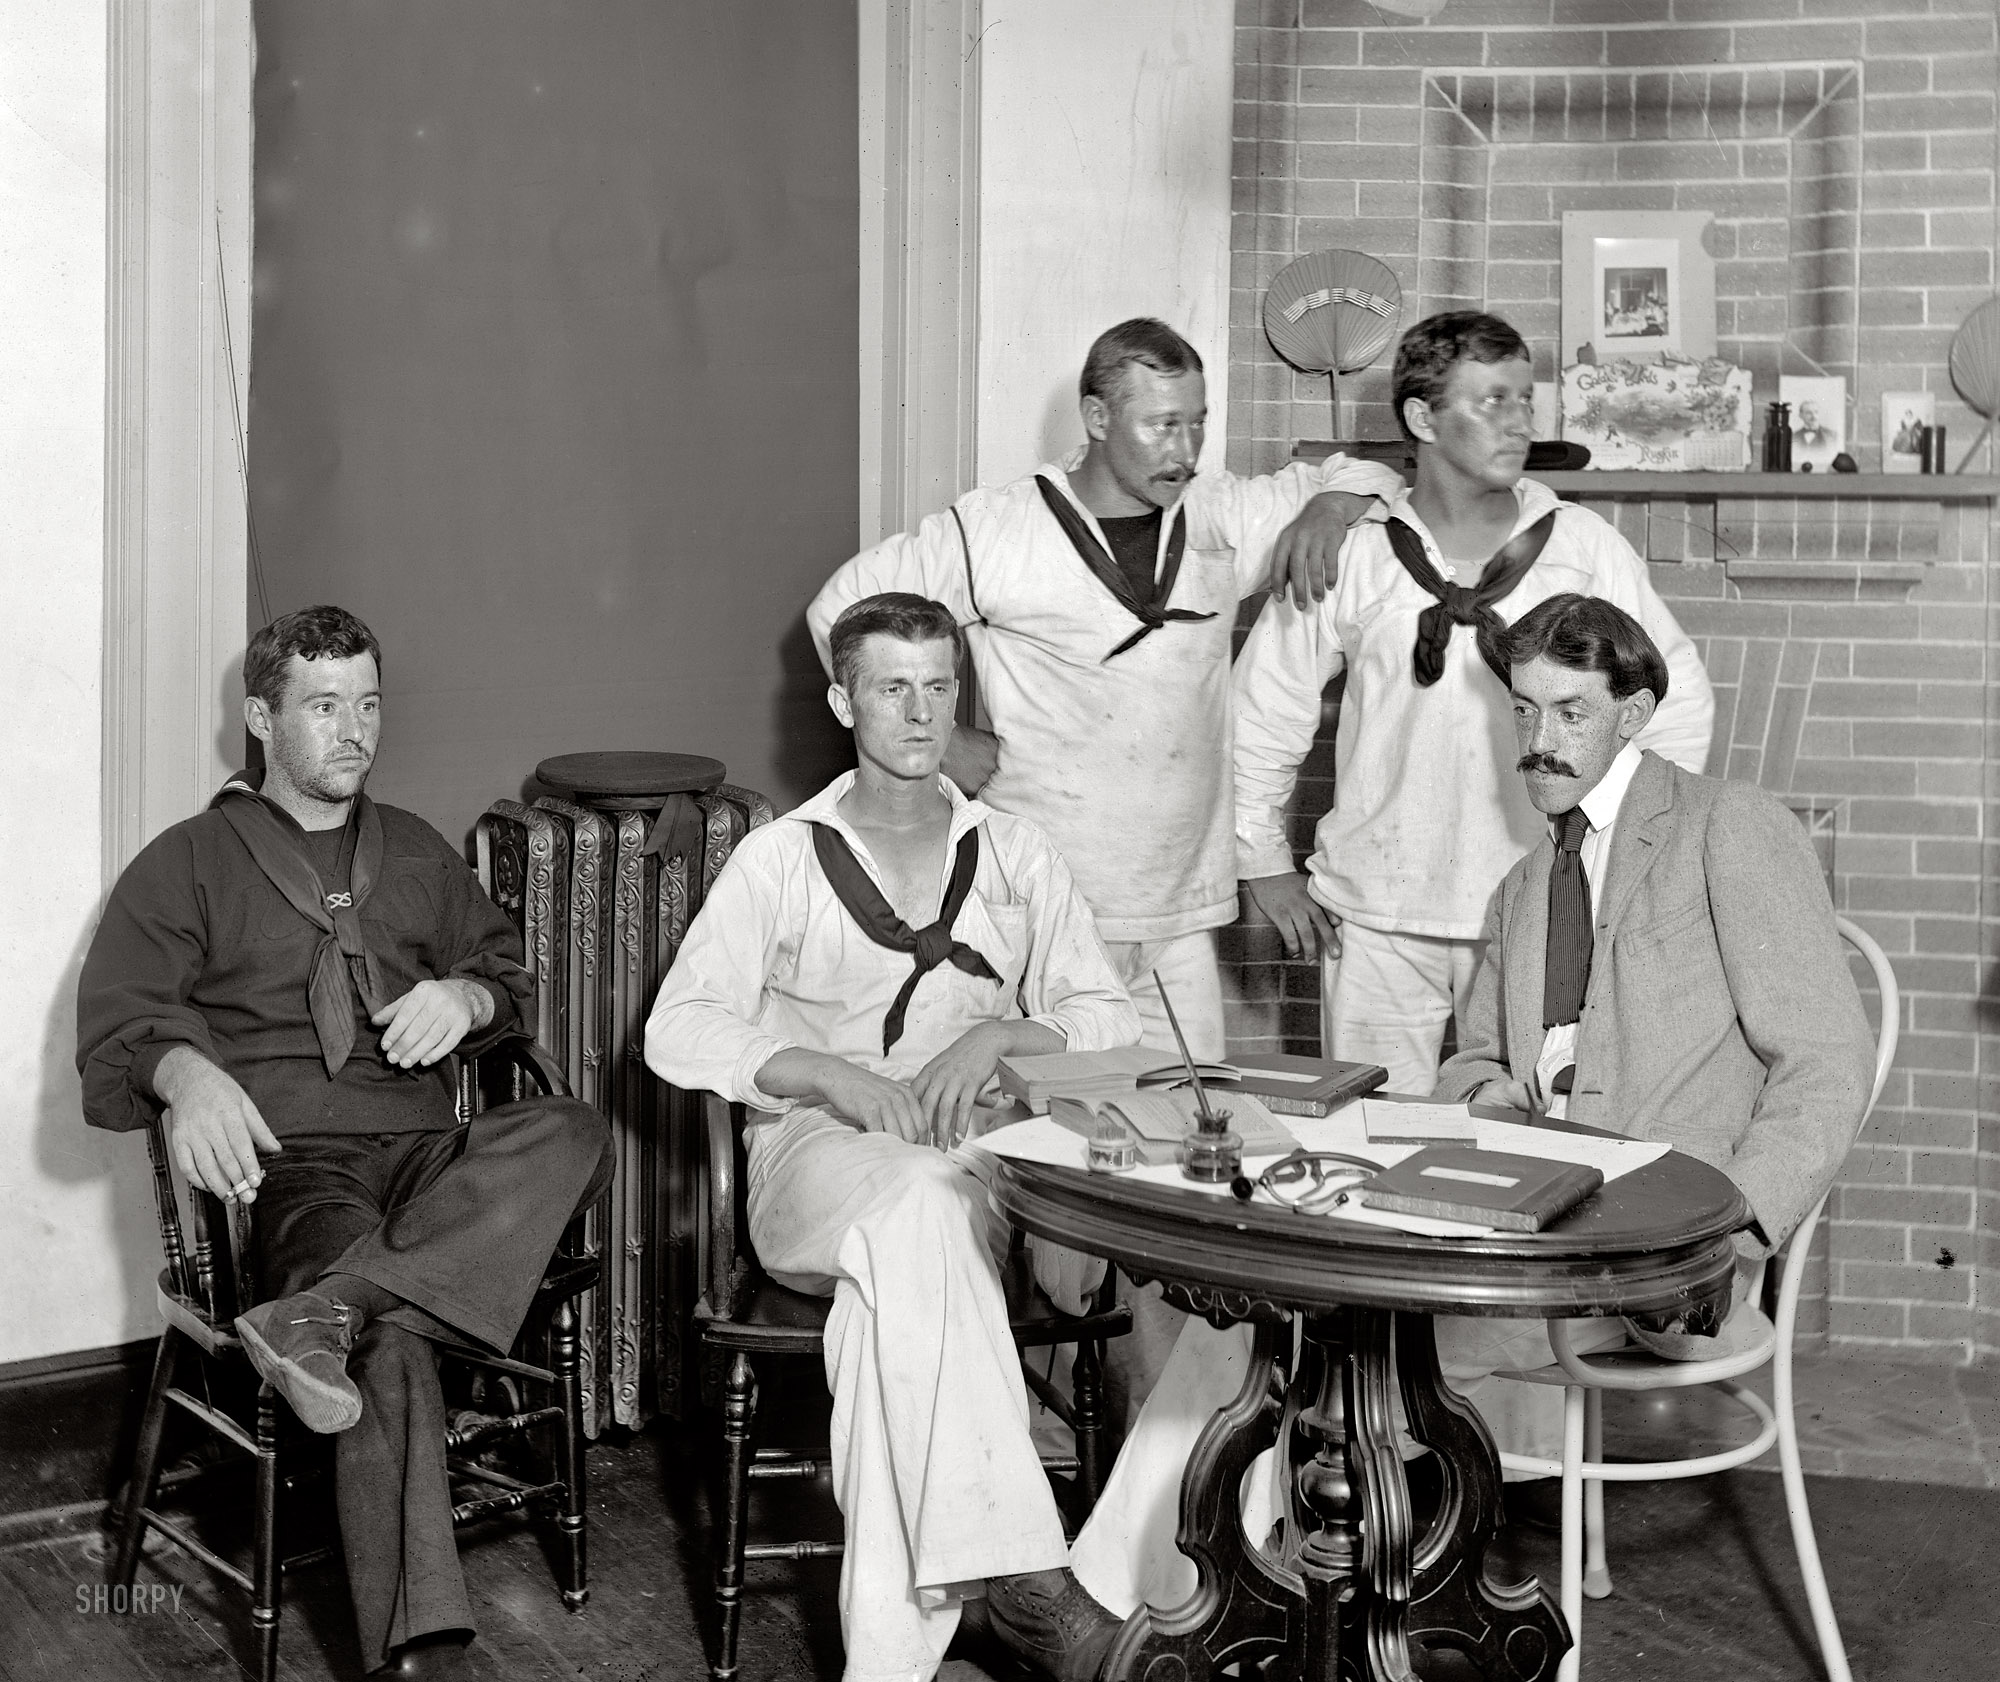 New York circa 1900. "A group of patients, Brooklyn Navy Yard hospital." 8x10 inch dry plate glass negative, Detroit Publishing Company. View full size.